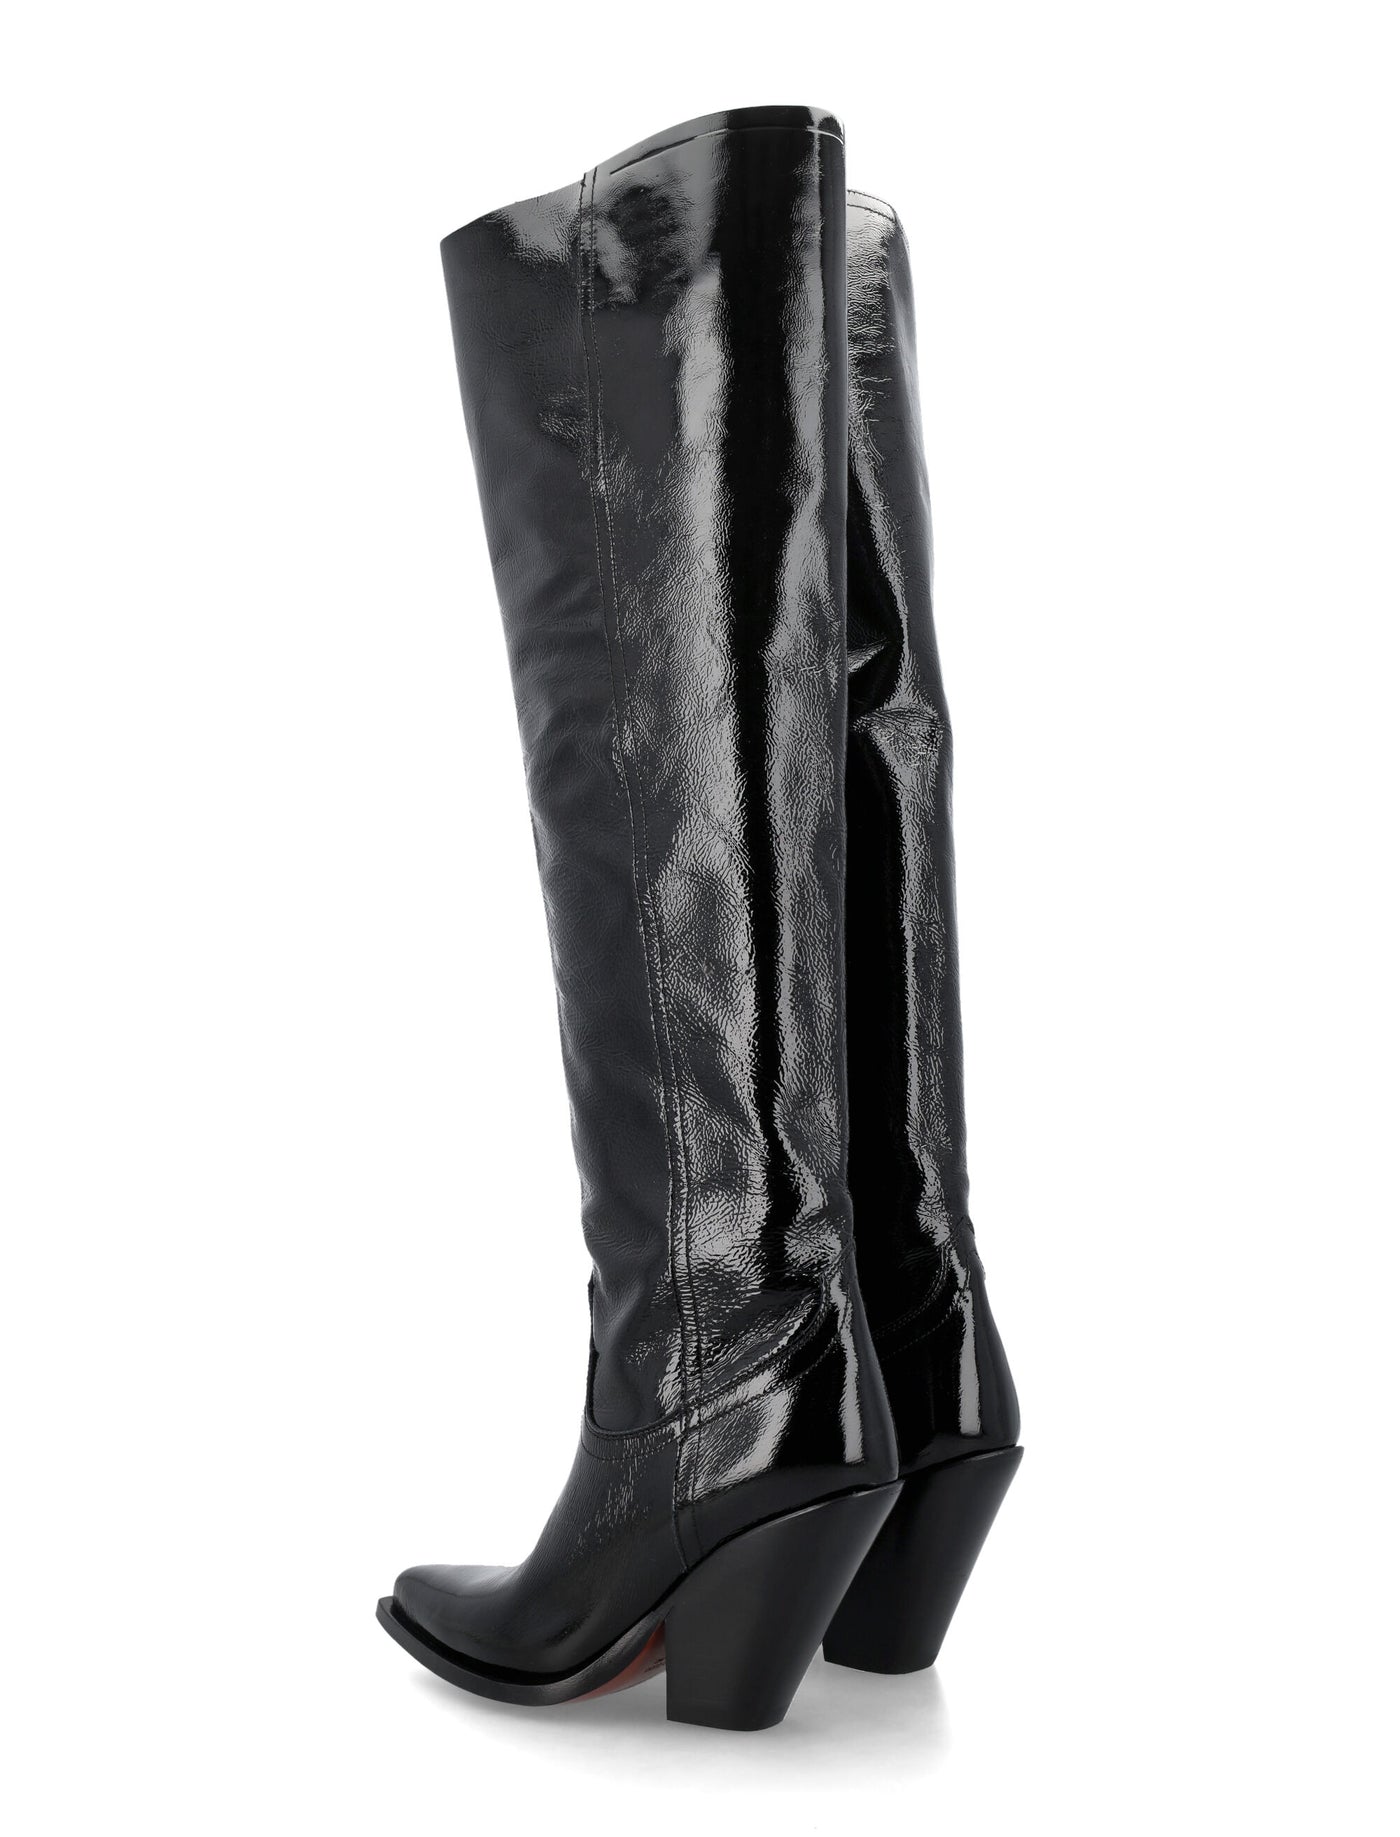 BLACK SONORA ACAPULCO NAPLACK OVER-THE-KNEE BOOTS